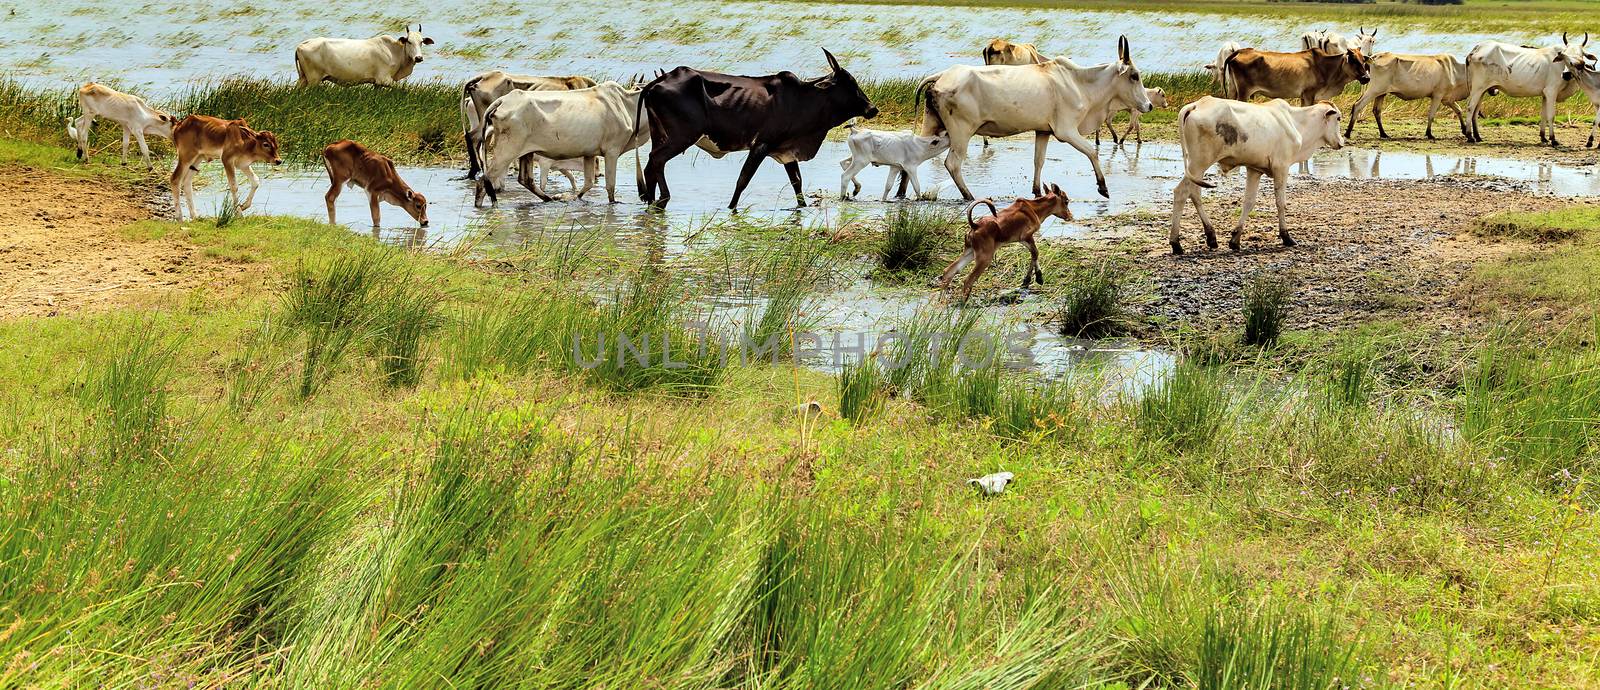 Zebu domestic cattle Cows in field. Cows on pasture. Cow herd in river